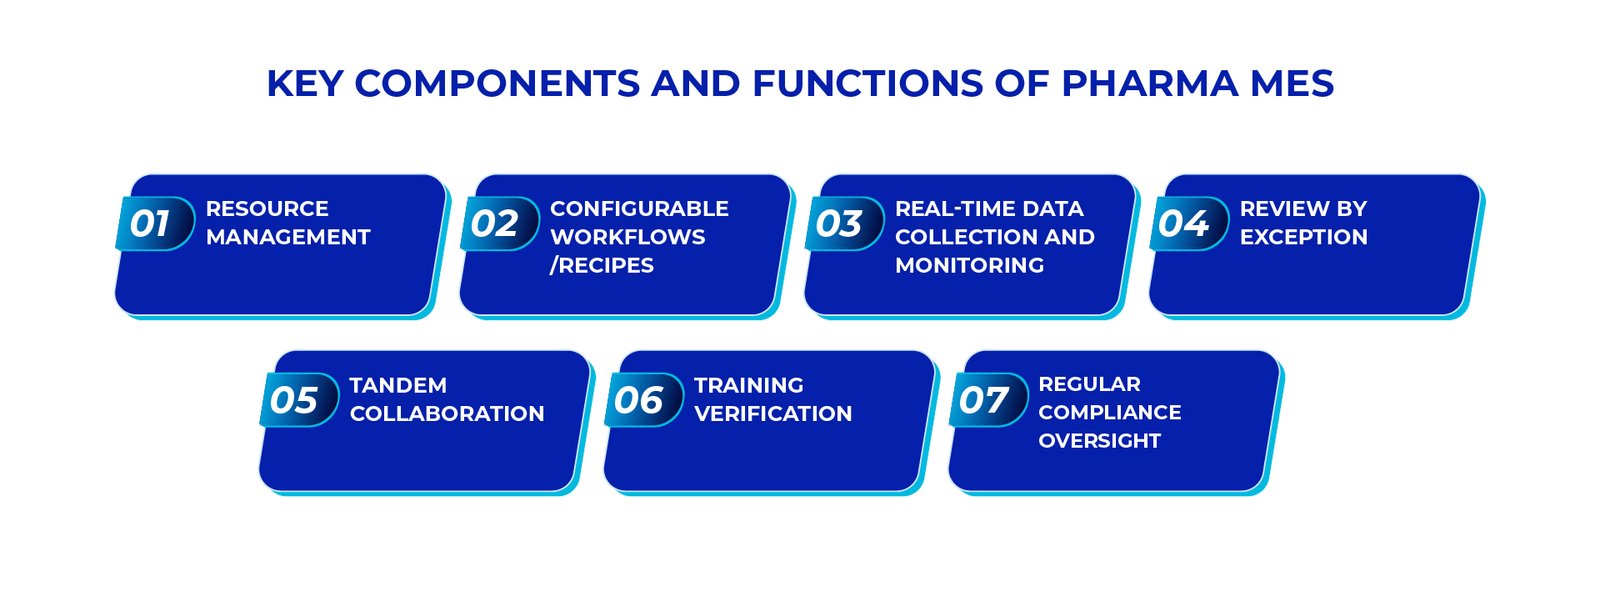 Key Components and Functions of Pharma MES